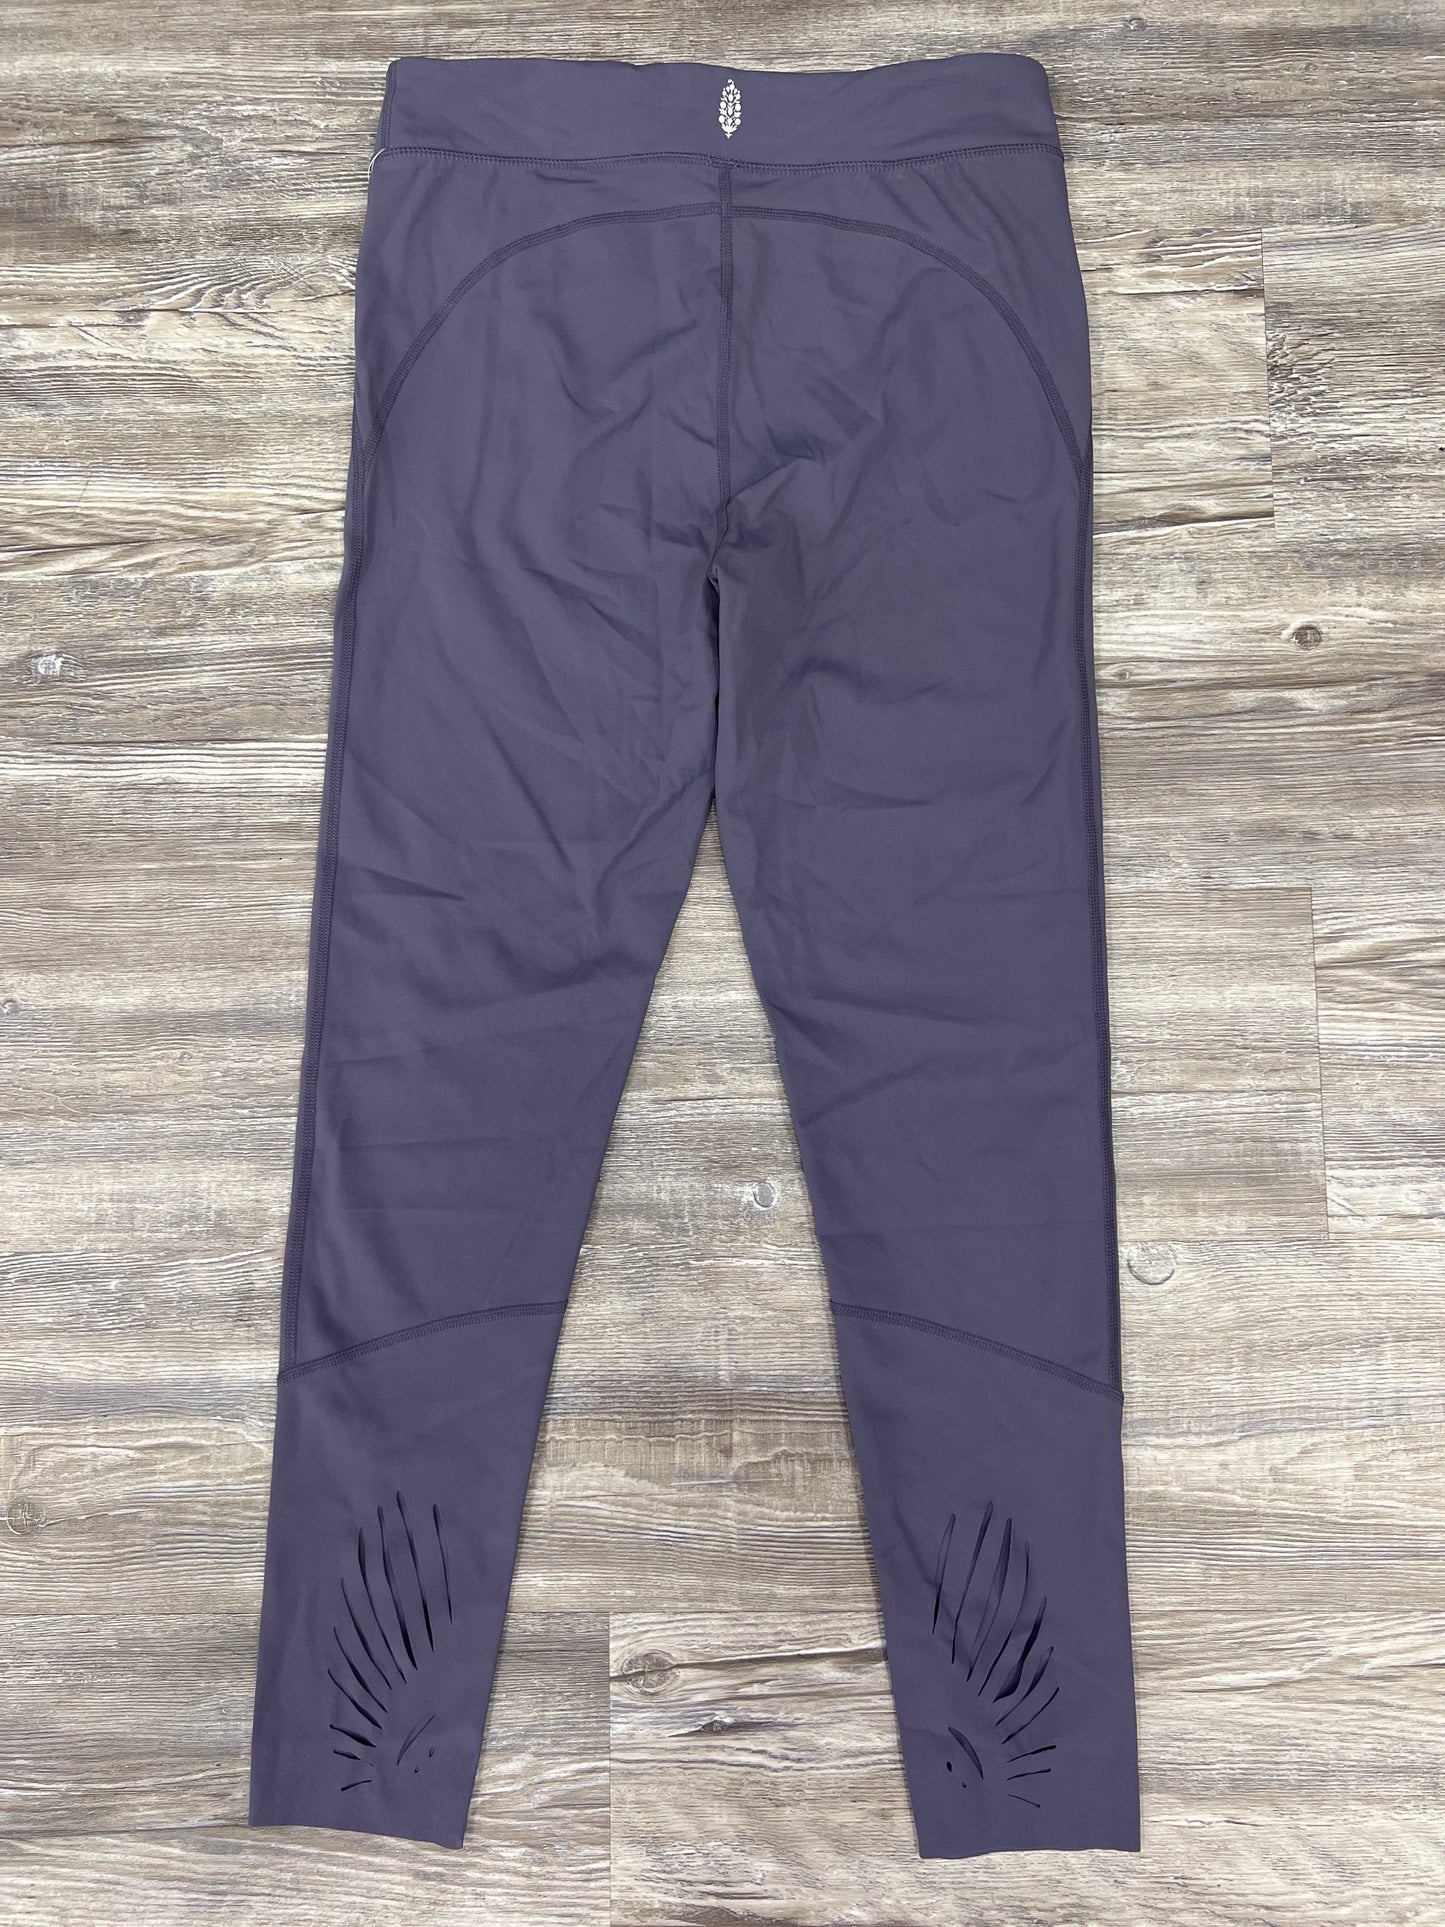 Athletic Leggings By Free People Size: M